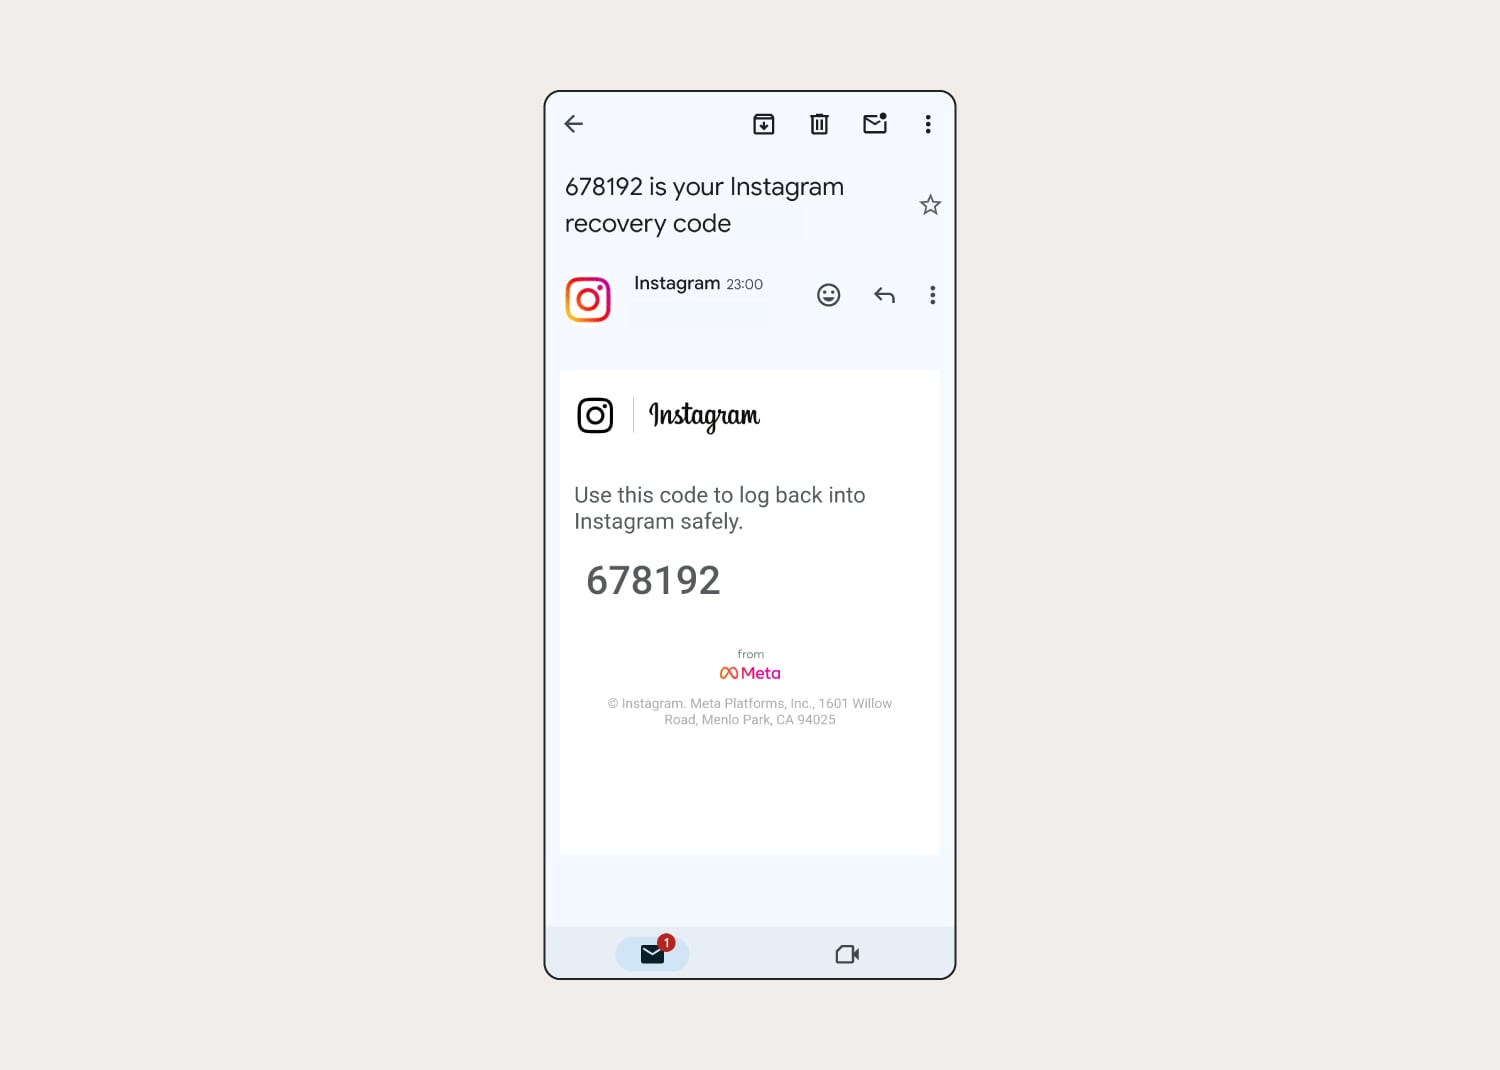 A screenshot shows an example email from Instagram during the recovery process.